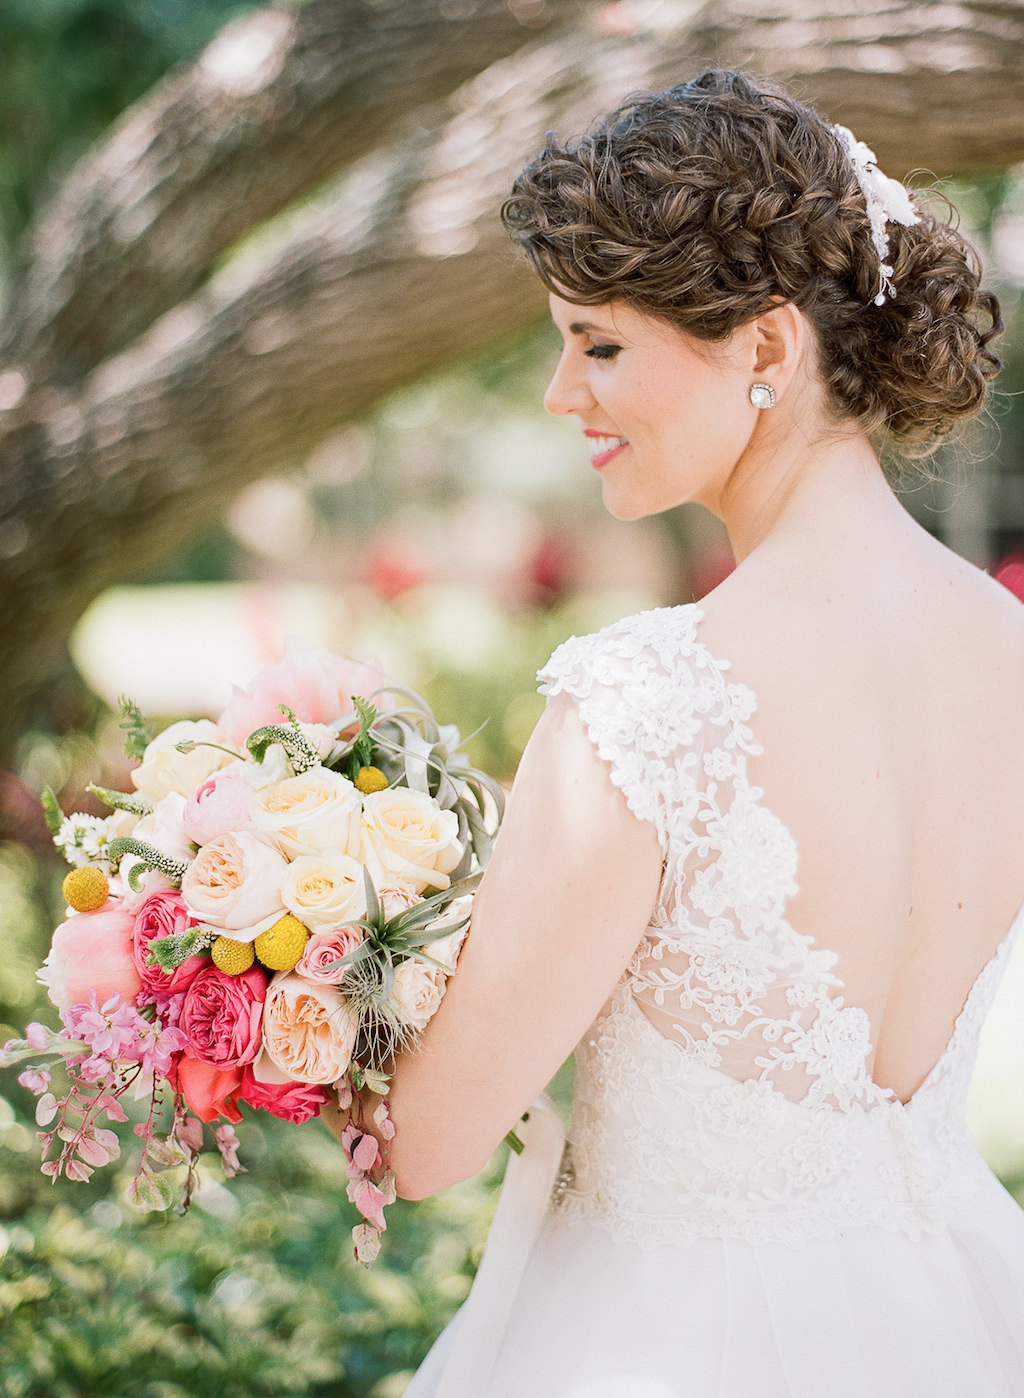 Outdoor Bridal Portrait wearing Lace Sleeve Open V Backed Paloma Blanca Wedding Dress with Peach, Blush, Magenta, and Yellow Bouquet with Greenery with Stylish Side Braid Wedding Updo Hair